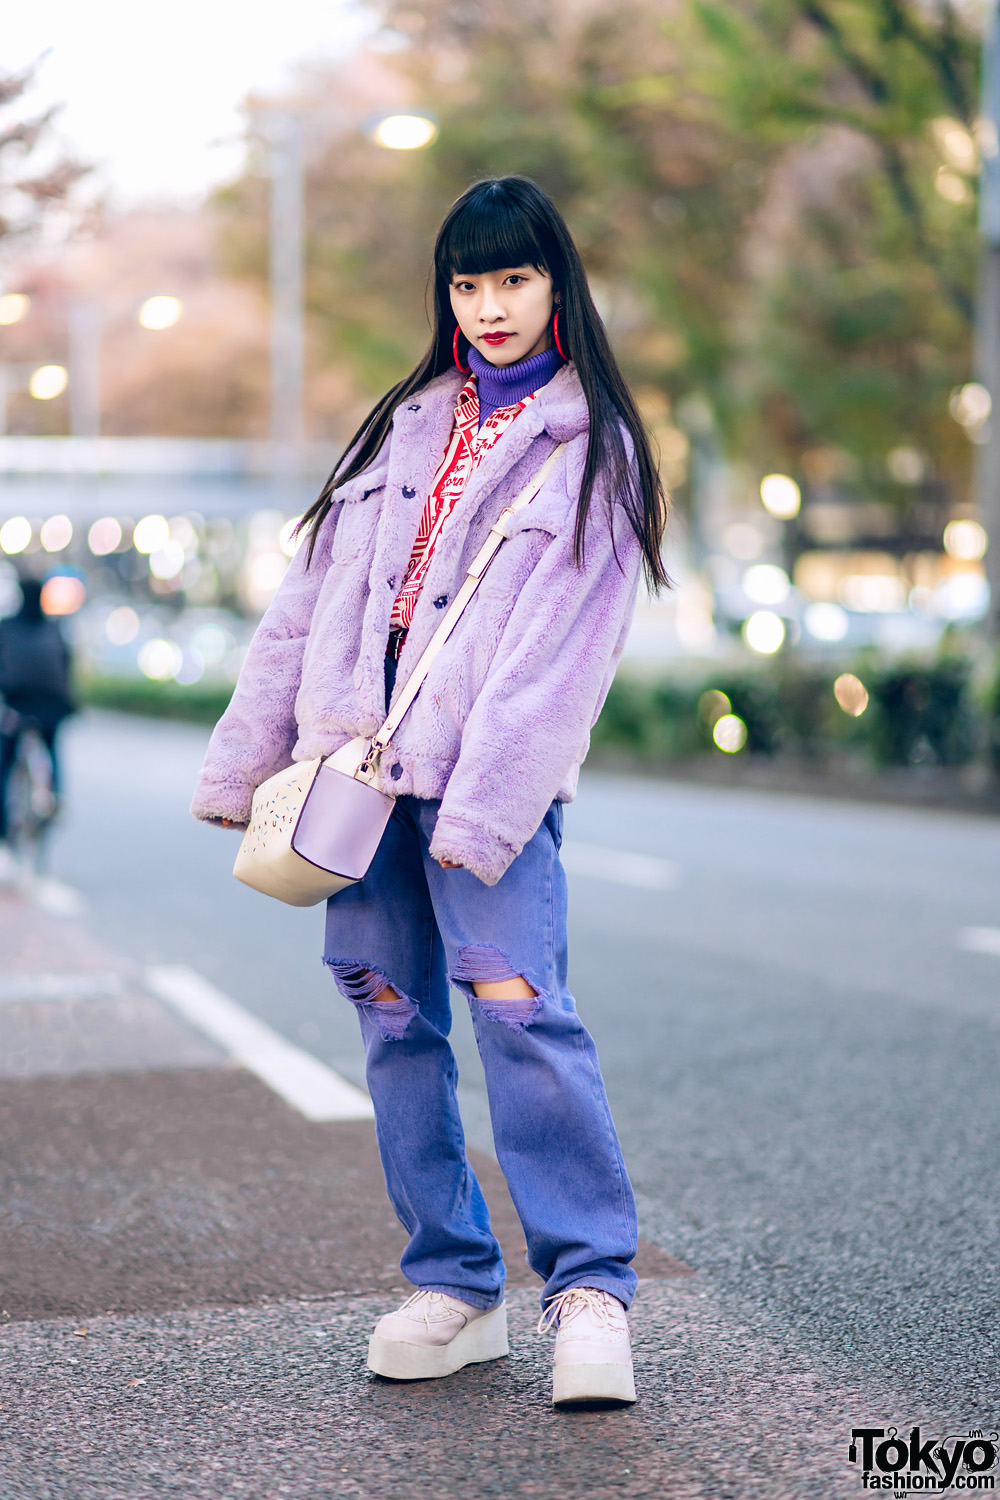 Trendy Purple Jeans for a Stylish Look